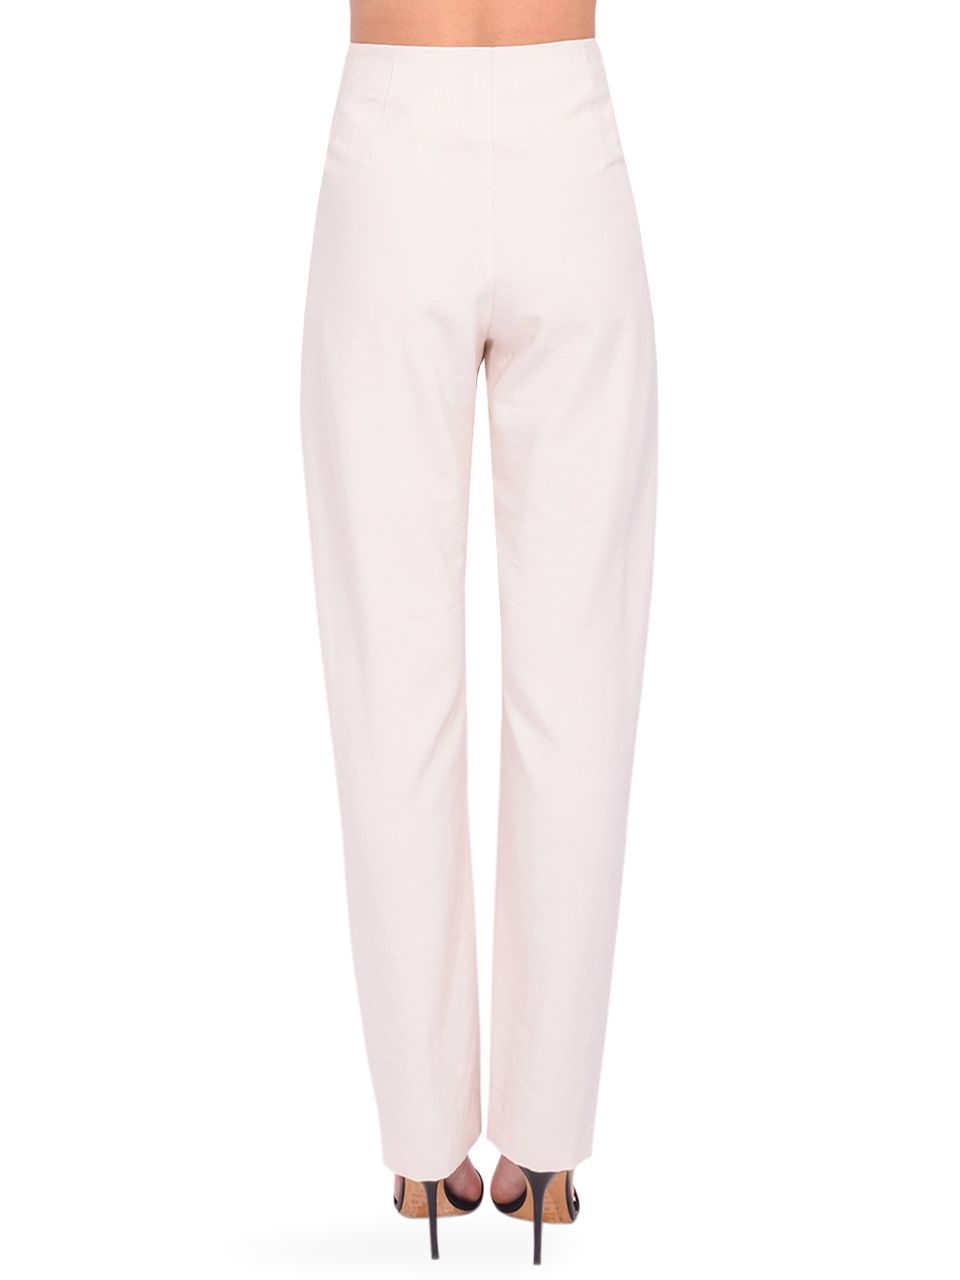 THE SEI Pleat Trouser in Pearl Back View 